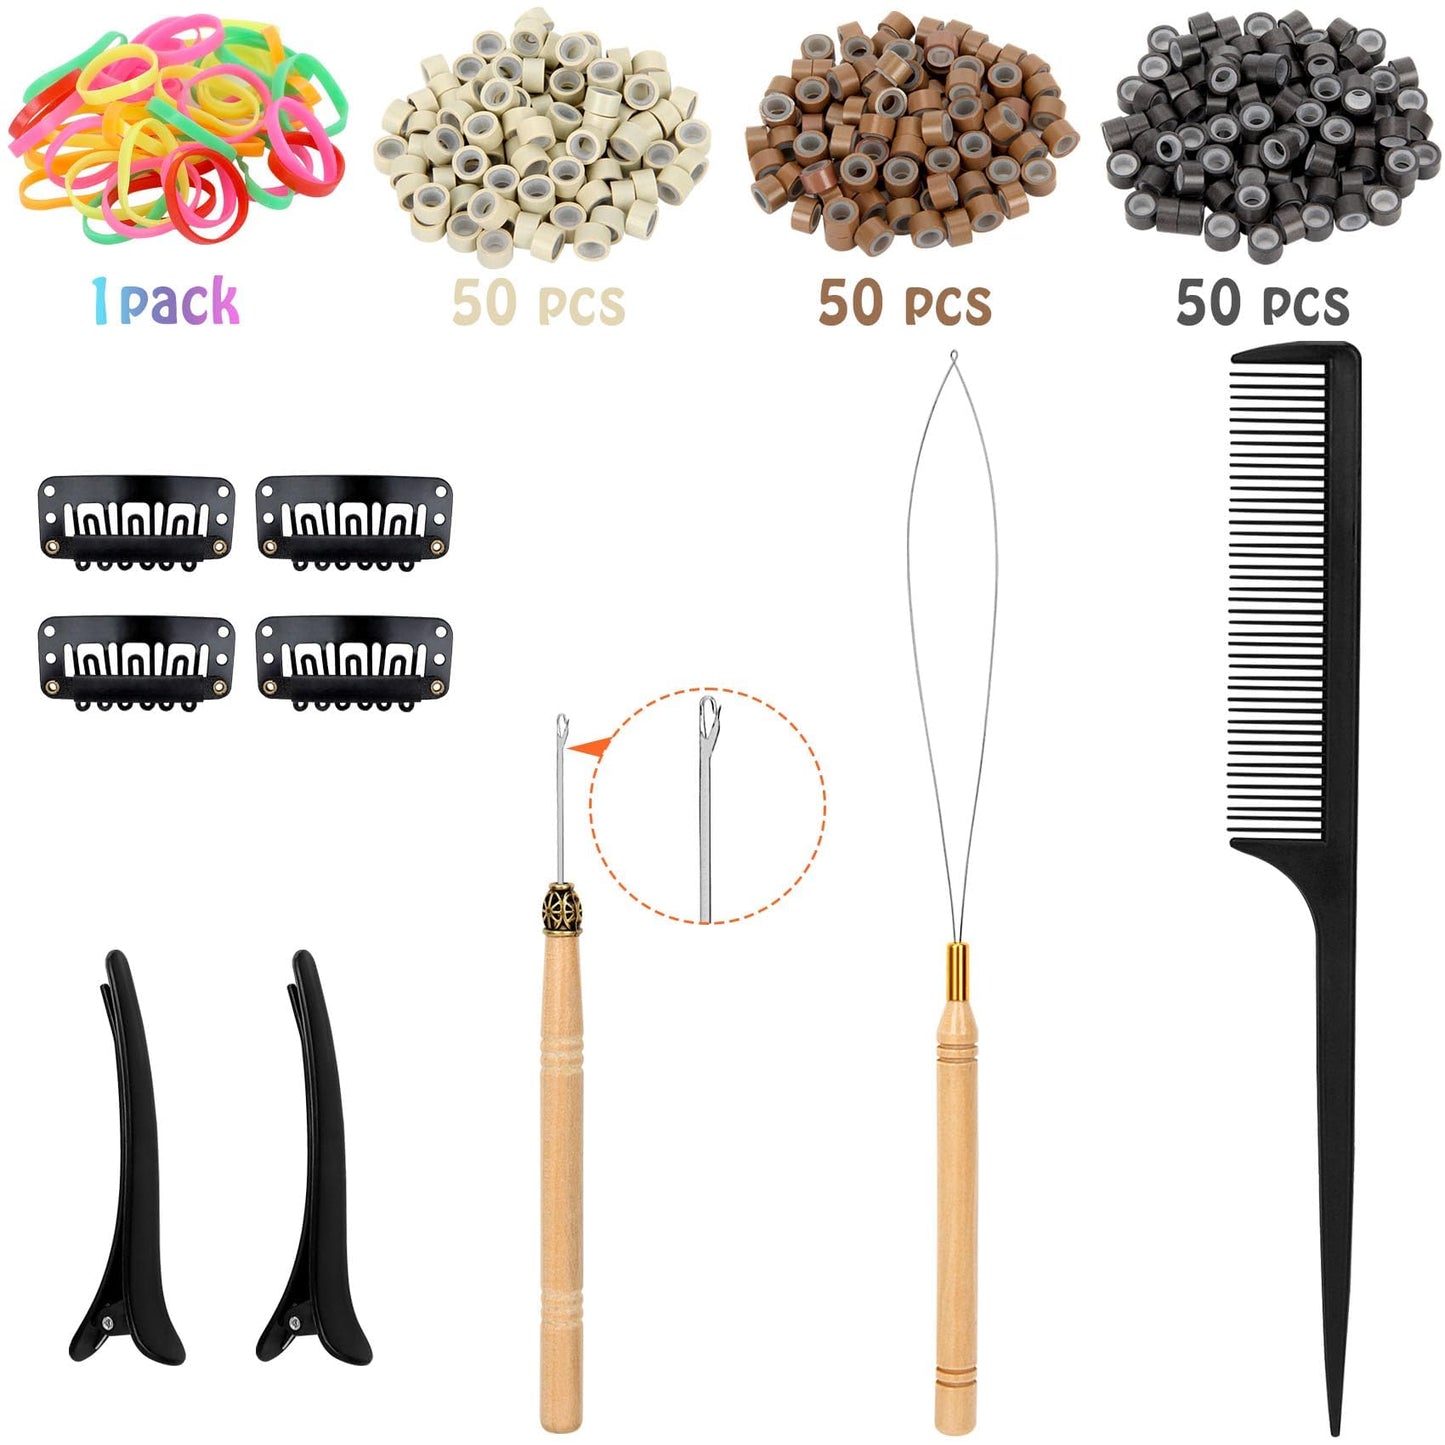 Hair Tinsel Kit (48 Inch, 18 Colors, 4320 strands), Tinsel Hair Extensions with Tools， Heat Resistant Fairy Hair Tinsel Kit for Women Girls Hair Accessories